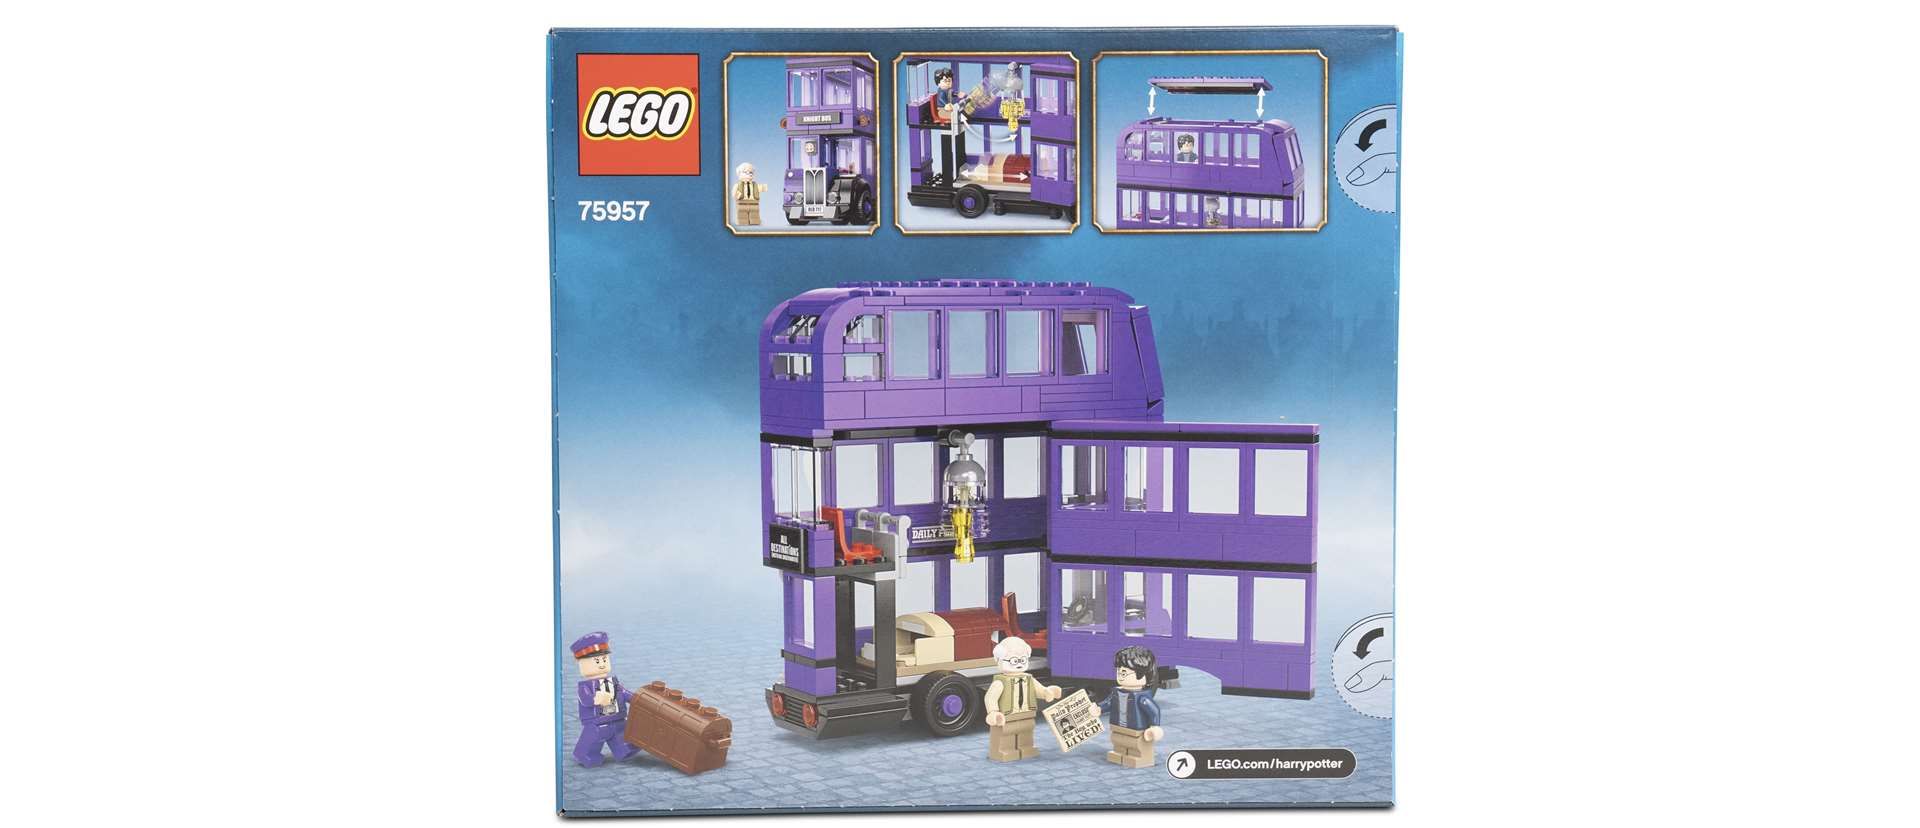 LEGO is once again on a top toys list